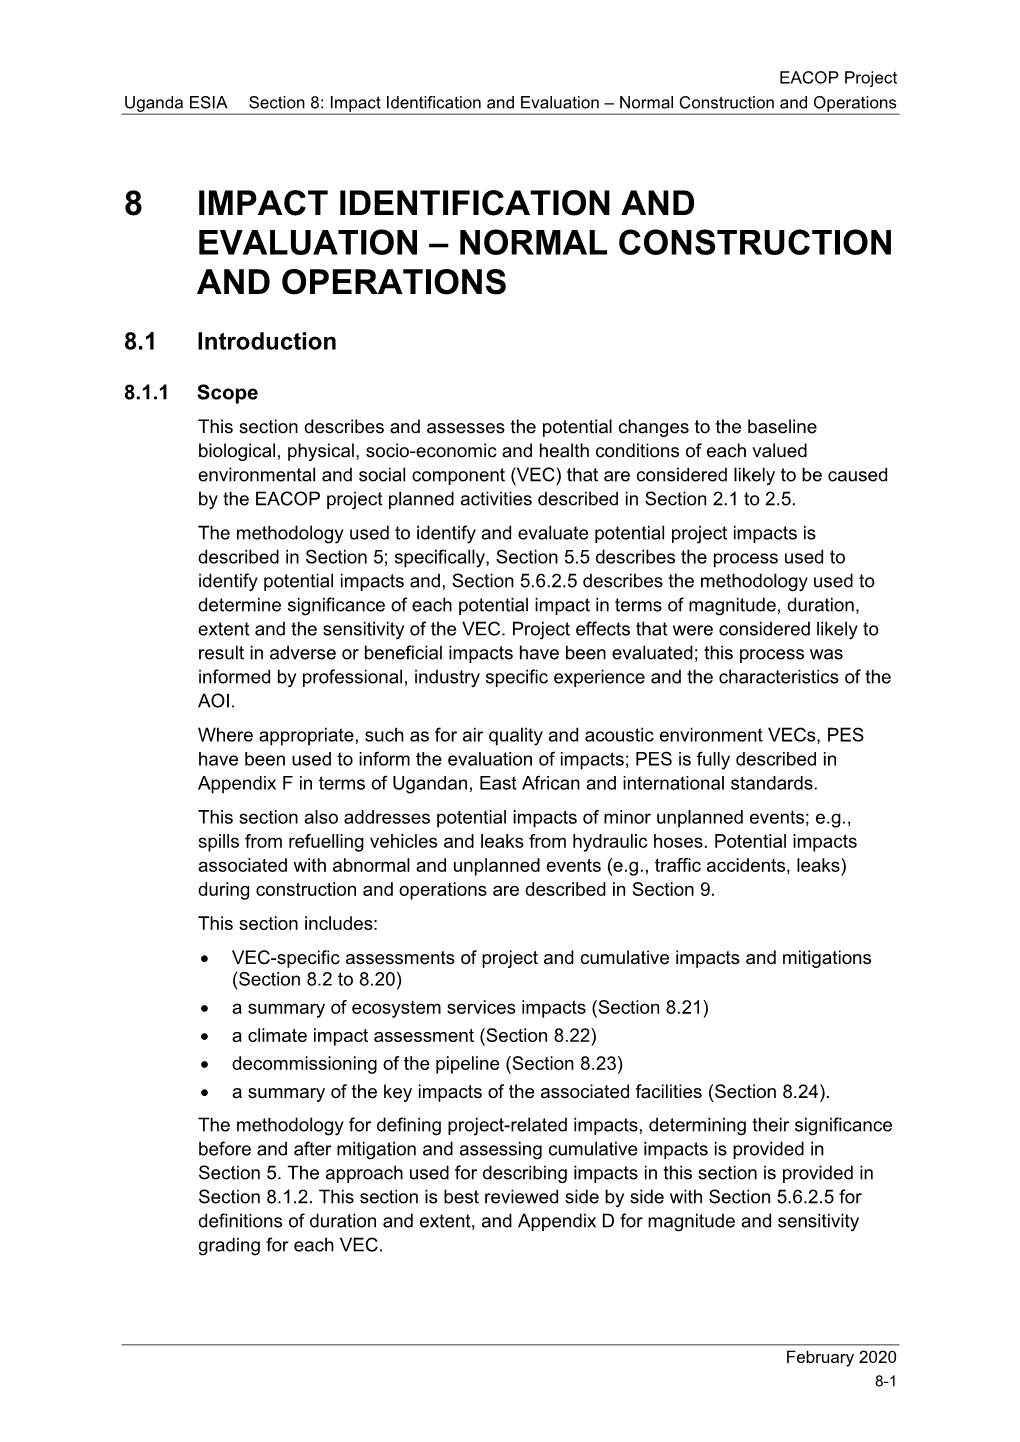 8 Impact Identification and Evaluation – Normal Construction and Operations